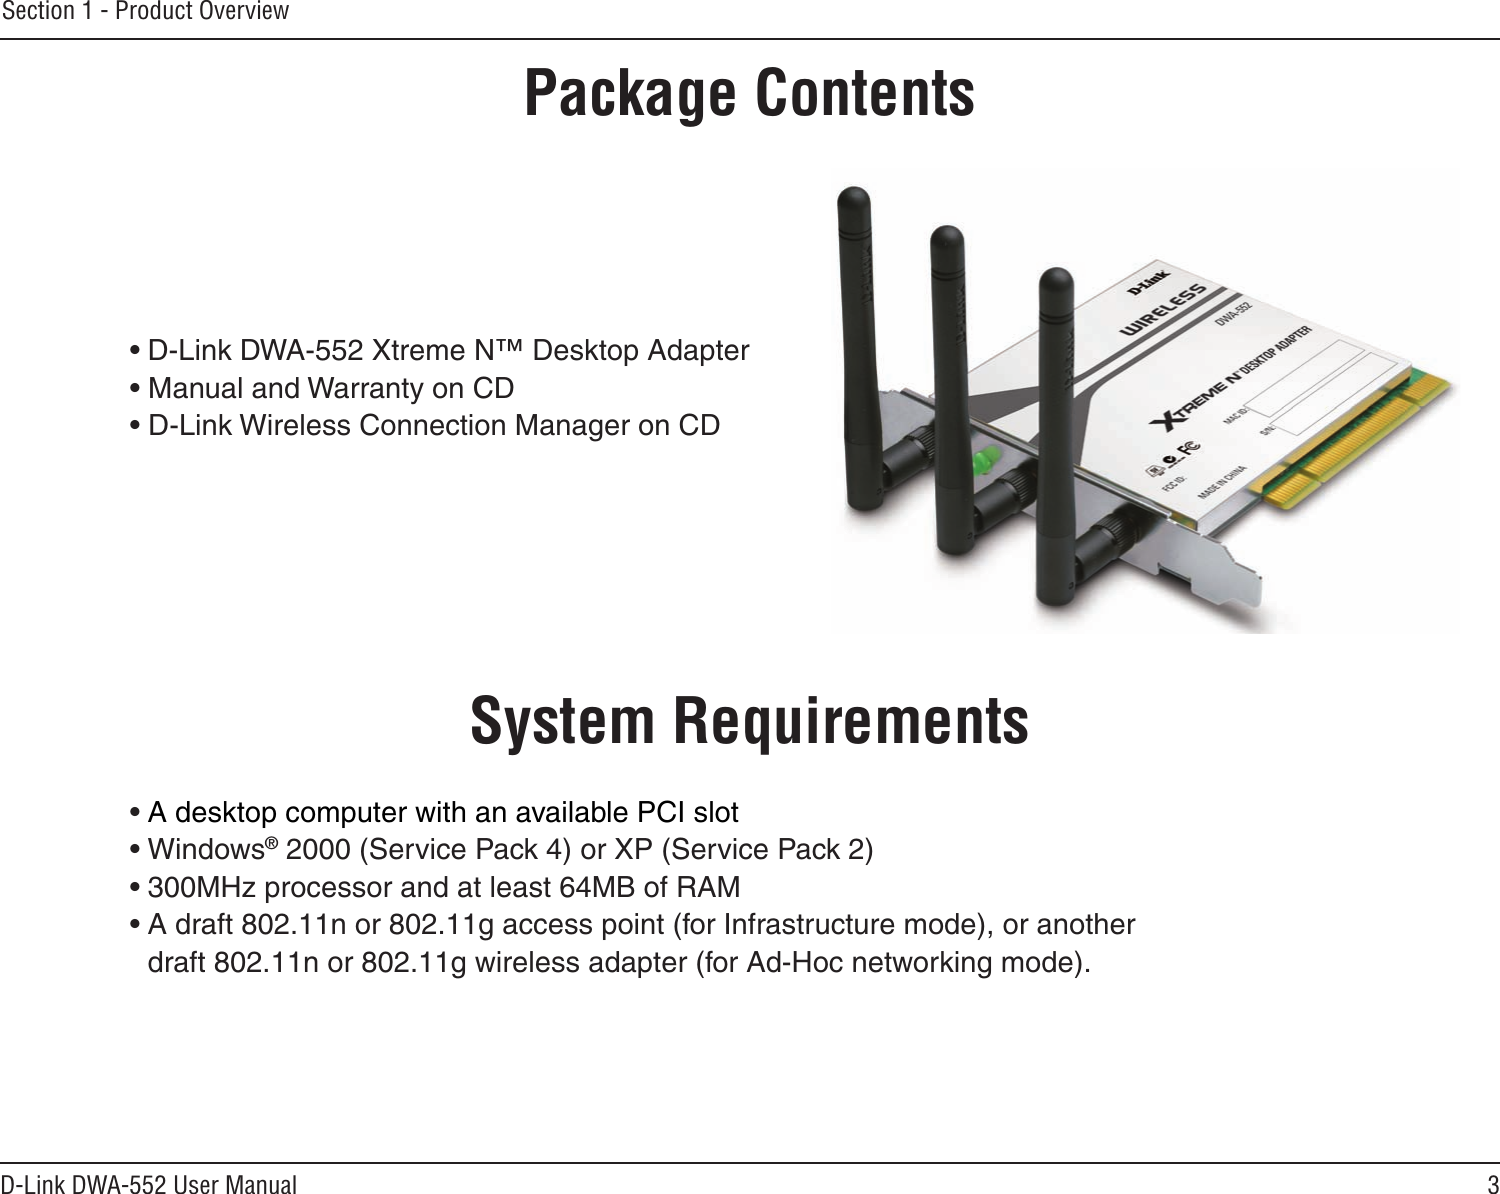 3D-Link DWA-552 User ManualSection 1 - Product Overview• D-Link DWA-552 Xtreme N™ Desktop Adapter• Manual and Warranty on CD• D-Link Wireless Connection Manager on CDSystem Requirements• A desktop computer with an available PCI slot• Windows® 2000 (Service Pack 4) or XP (Service Pack 2)• 300MHz processor and at least 64MB of RAM• A draft 802.11n or 802.11g access point (for Infrastructure mode), or another draft 802.11n or 802.11g wireless adapter (for Ad-Hoc networking mode).Product OverviewPackage Contents